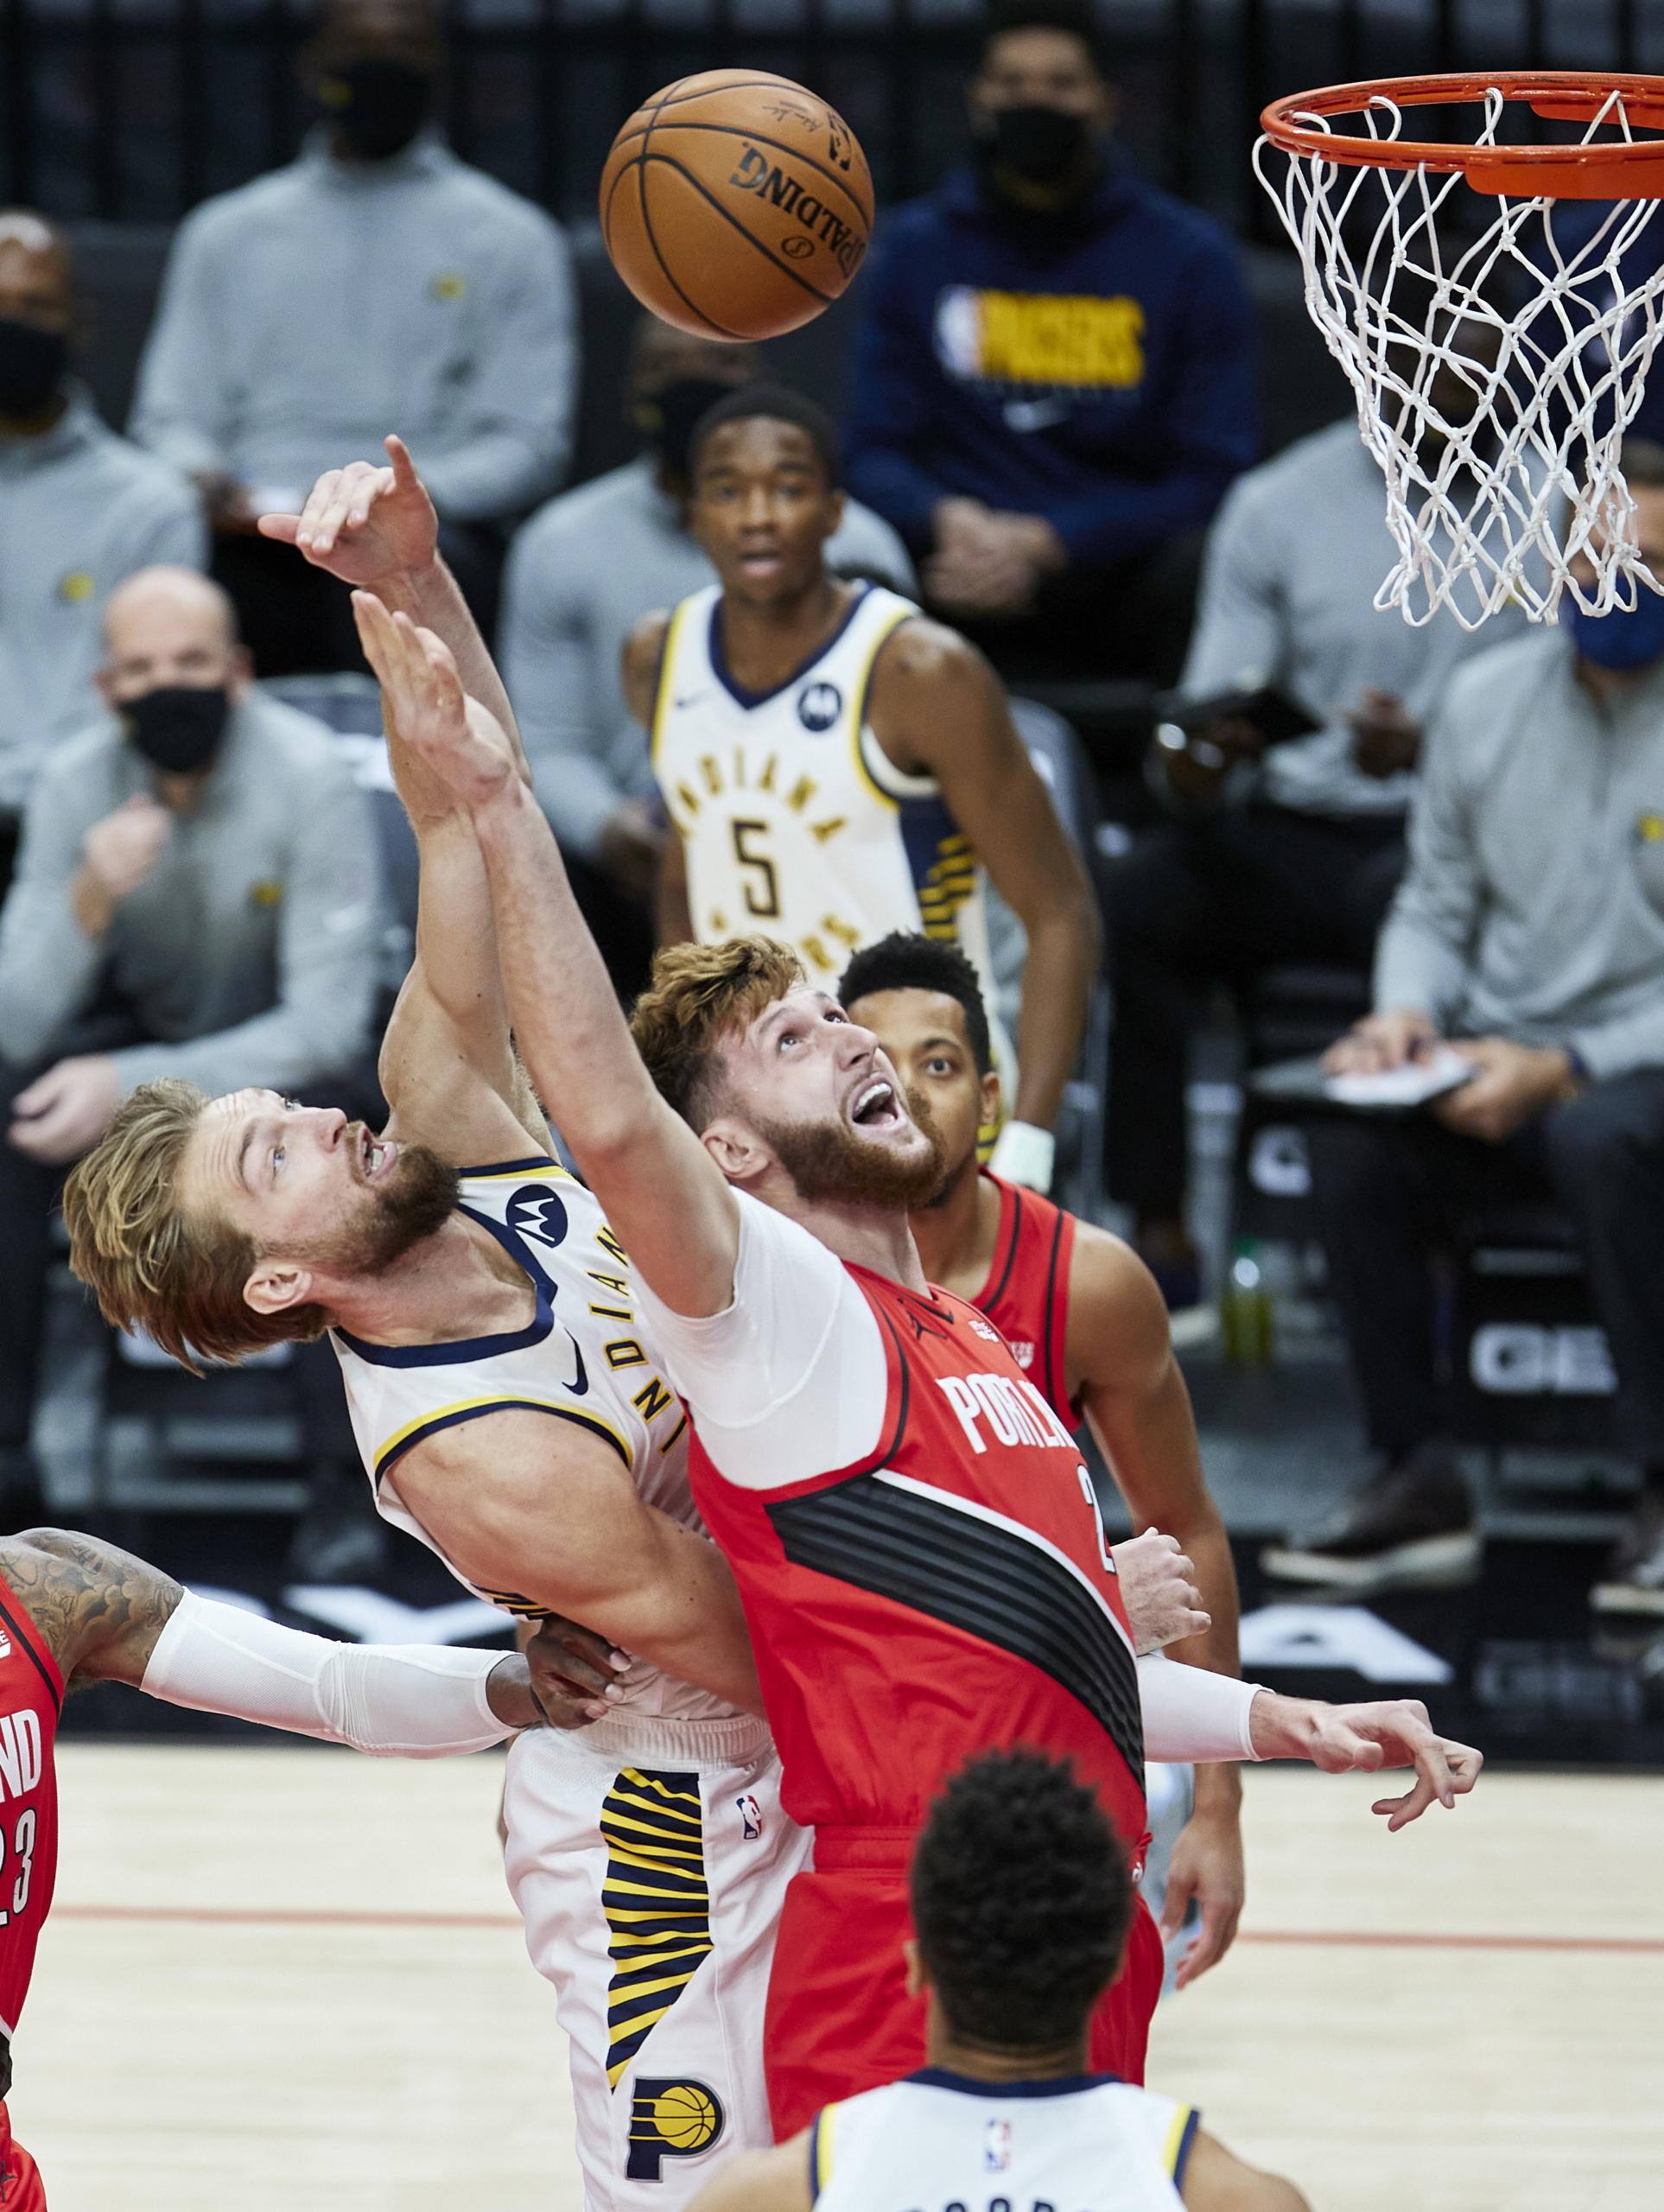 Indiana Pacers forward Domantas Sabonis, left, and Portland Trail Blazers center Jusuf Nurkic reach for a rebound during the first half of an NBA basketball game in Portland, Ore., Thursday, Jan. 14, 2021.